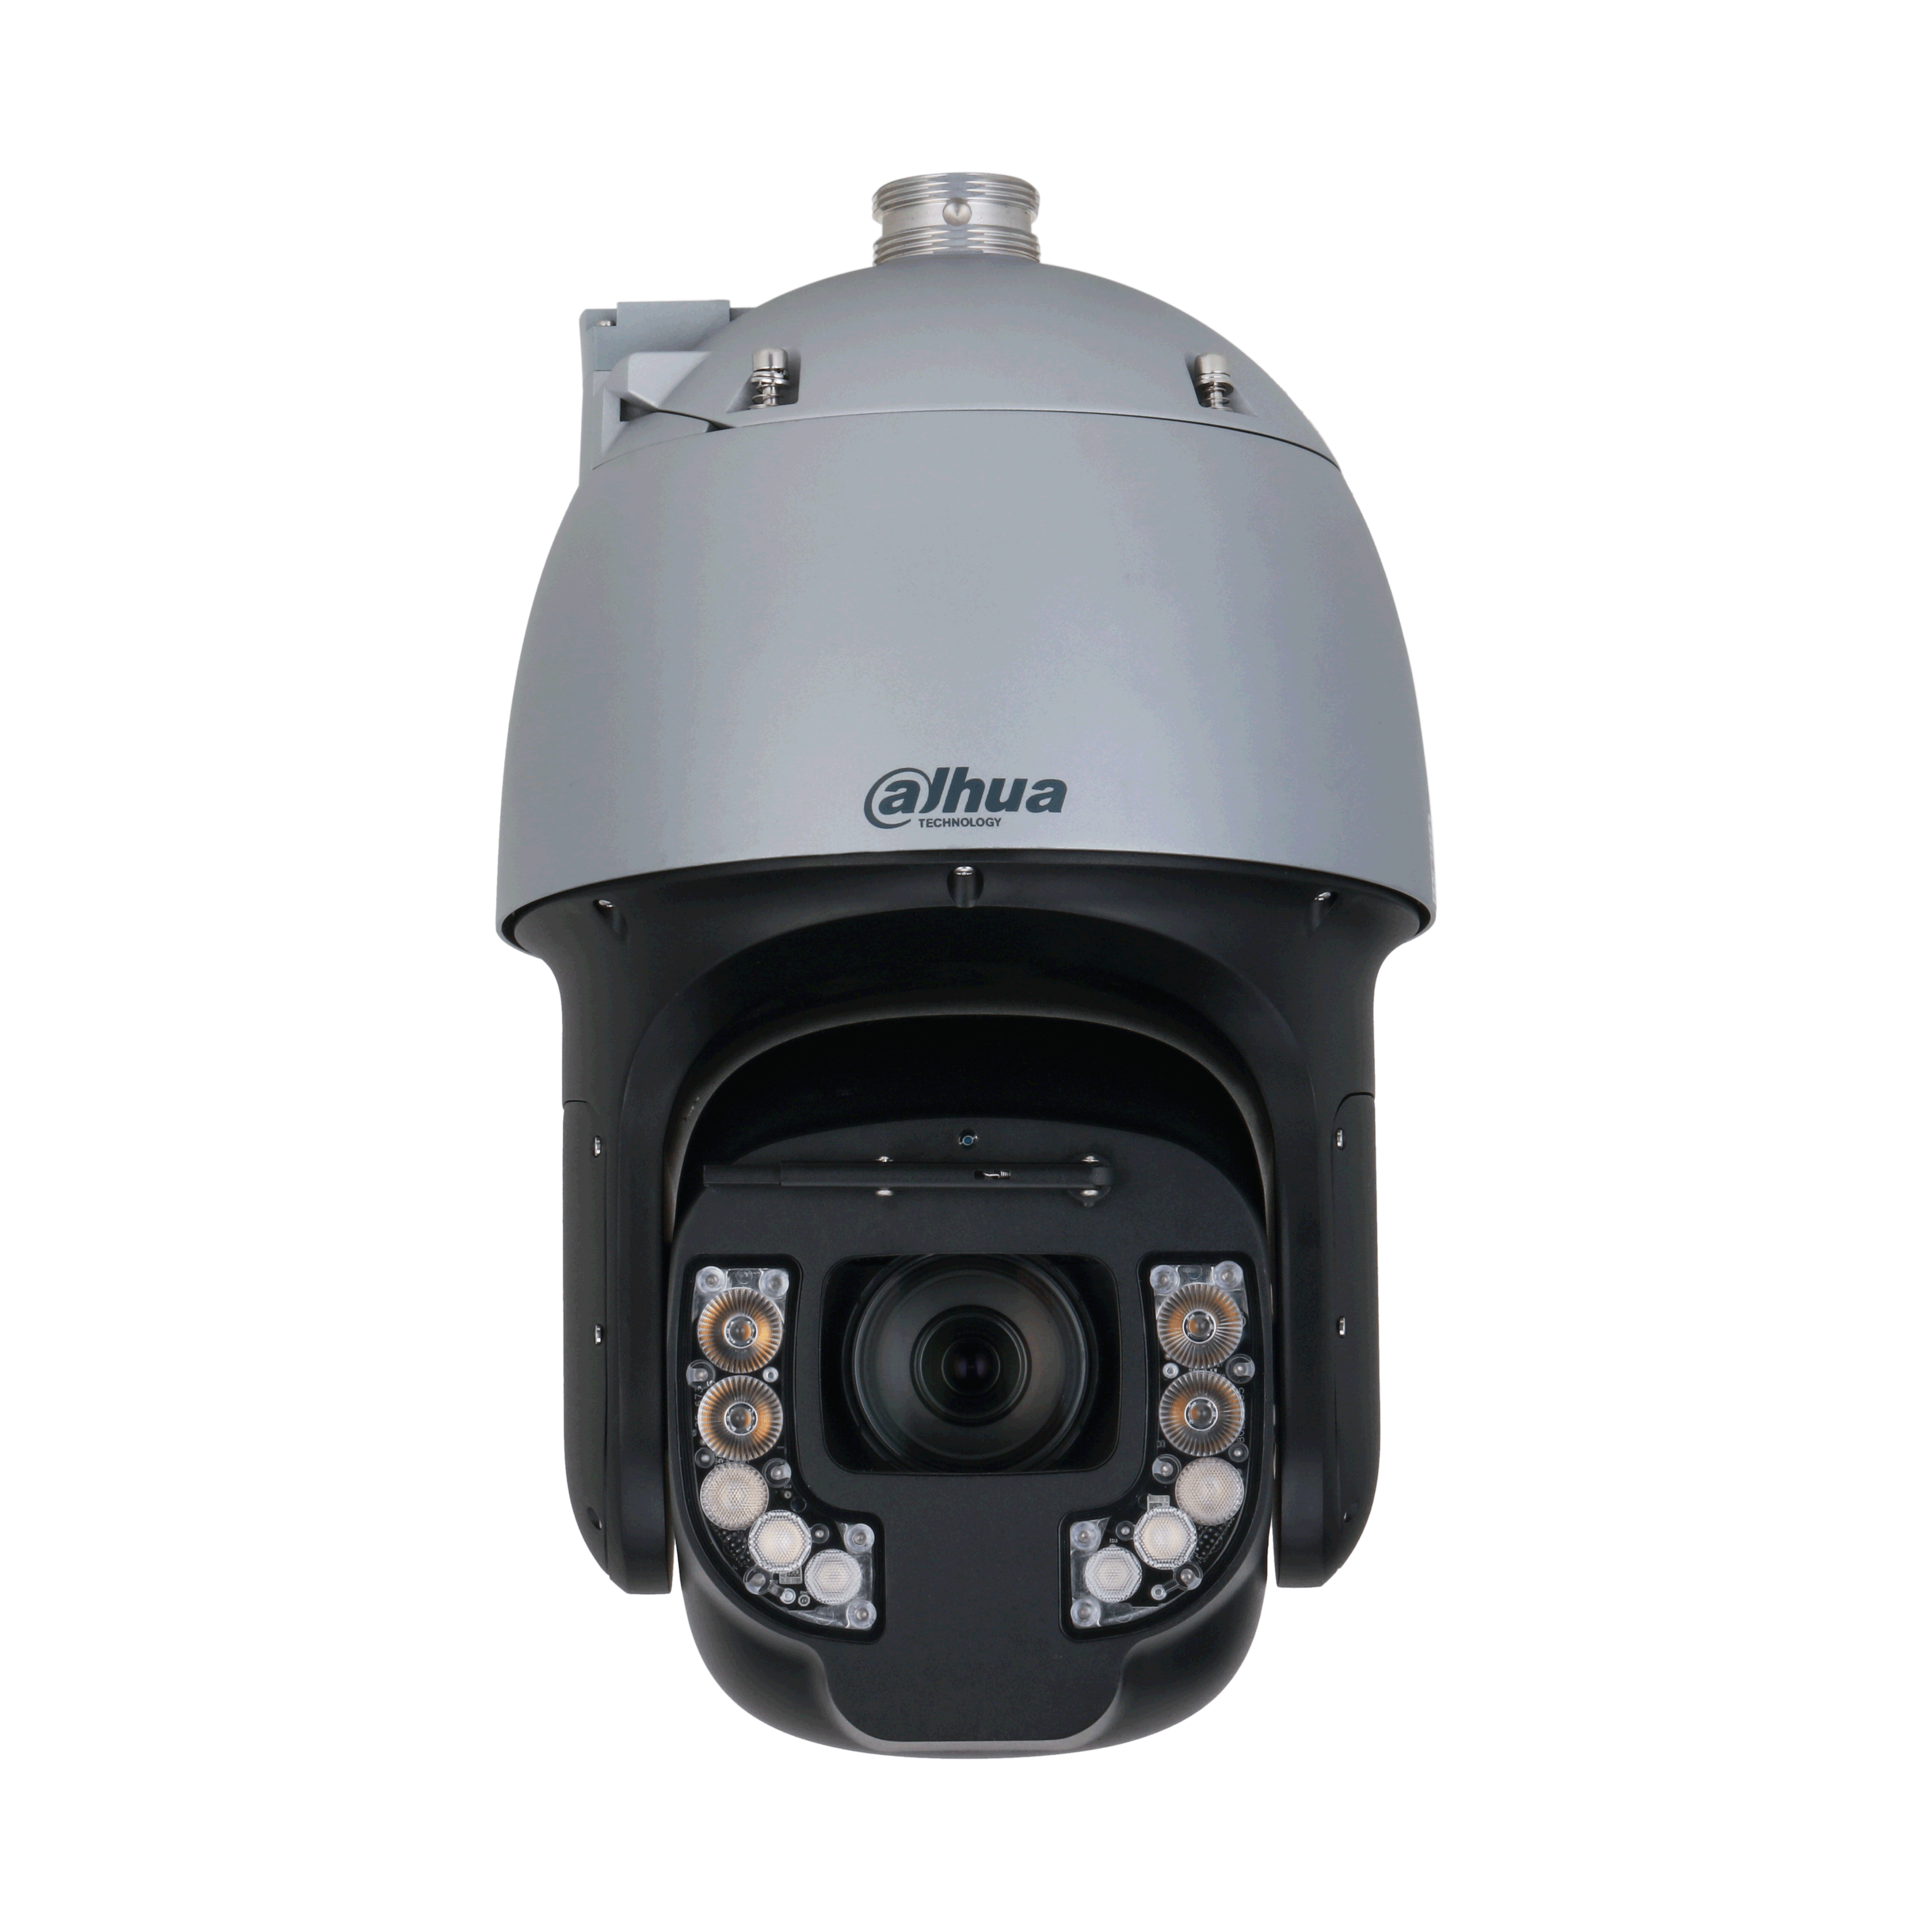 WIZMIND SERIES IP CAMERA SILVER AI AUTO TRACKING 8MP/4K H.264/4+/5/5+ SPEED DOME PTZ 120 WDR PLASTIC/METAL 6.25-300MMMOTORISED LENS 48X ZOOM STARLIGHT IR 500M HI-POE IP67 WITHOUT MIC AUDIO IN AUDIO OUT 7 x ALARM IN 2 x ALARM OUT SUPPORT UP TO 512GB SD 36VDC